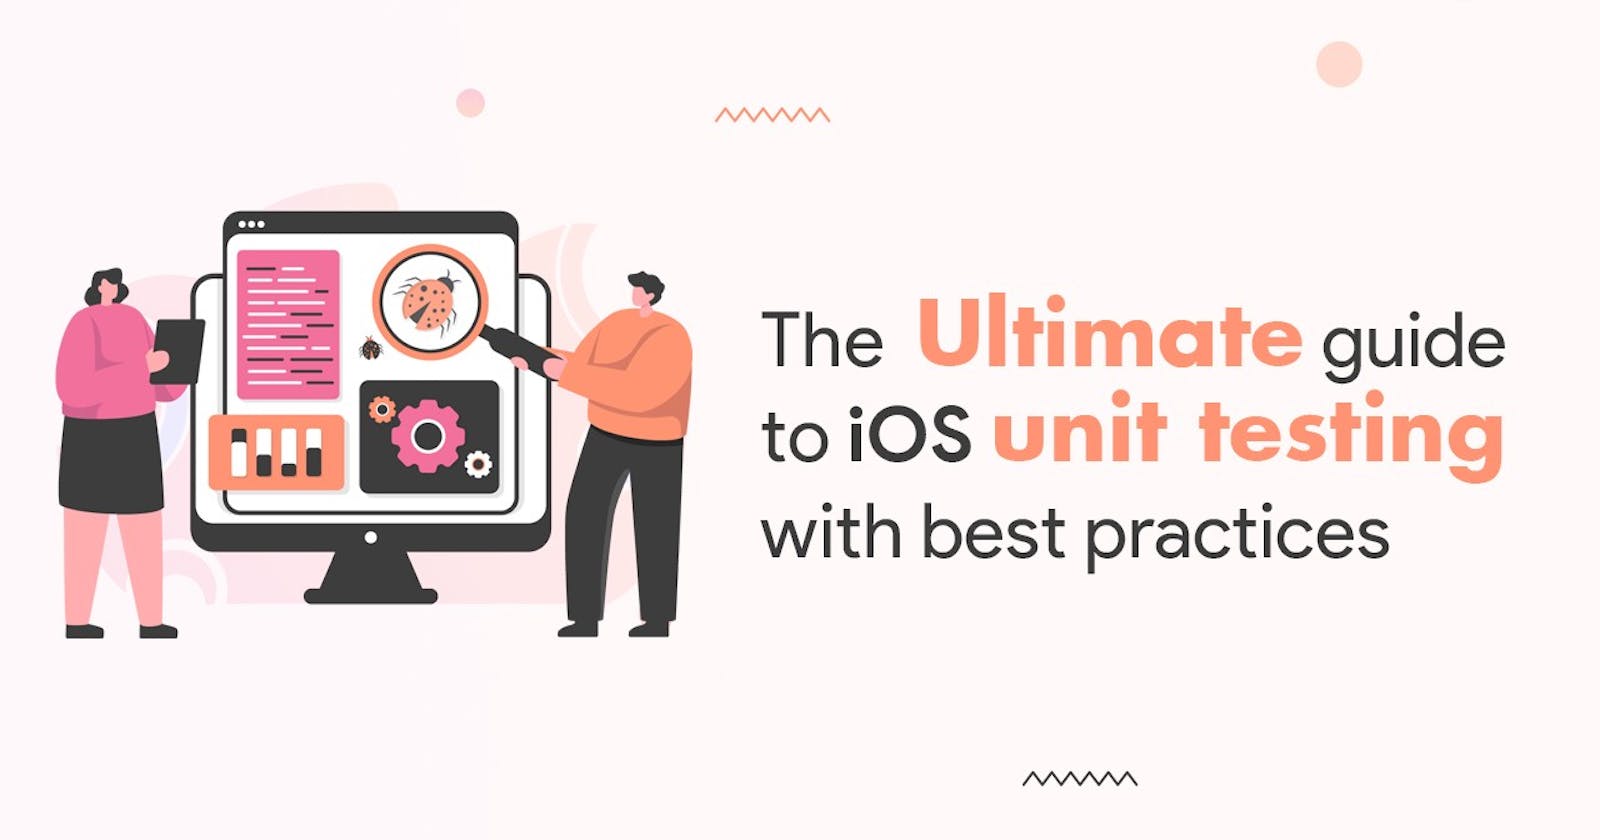 The Ultimate guide to iOS unit testing with best practices — Part 2